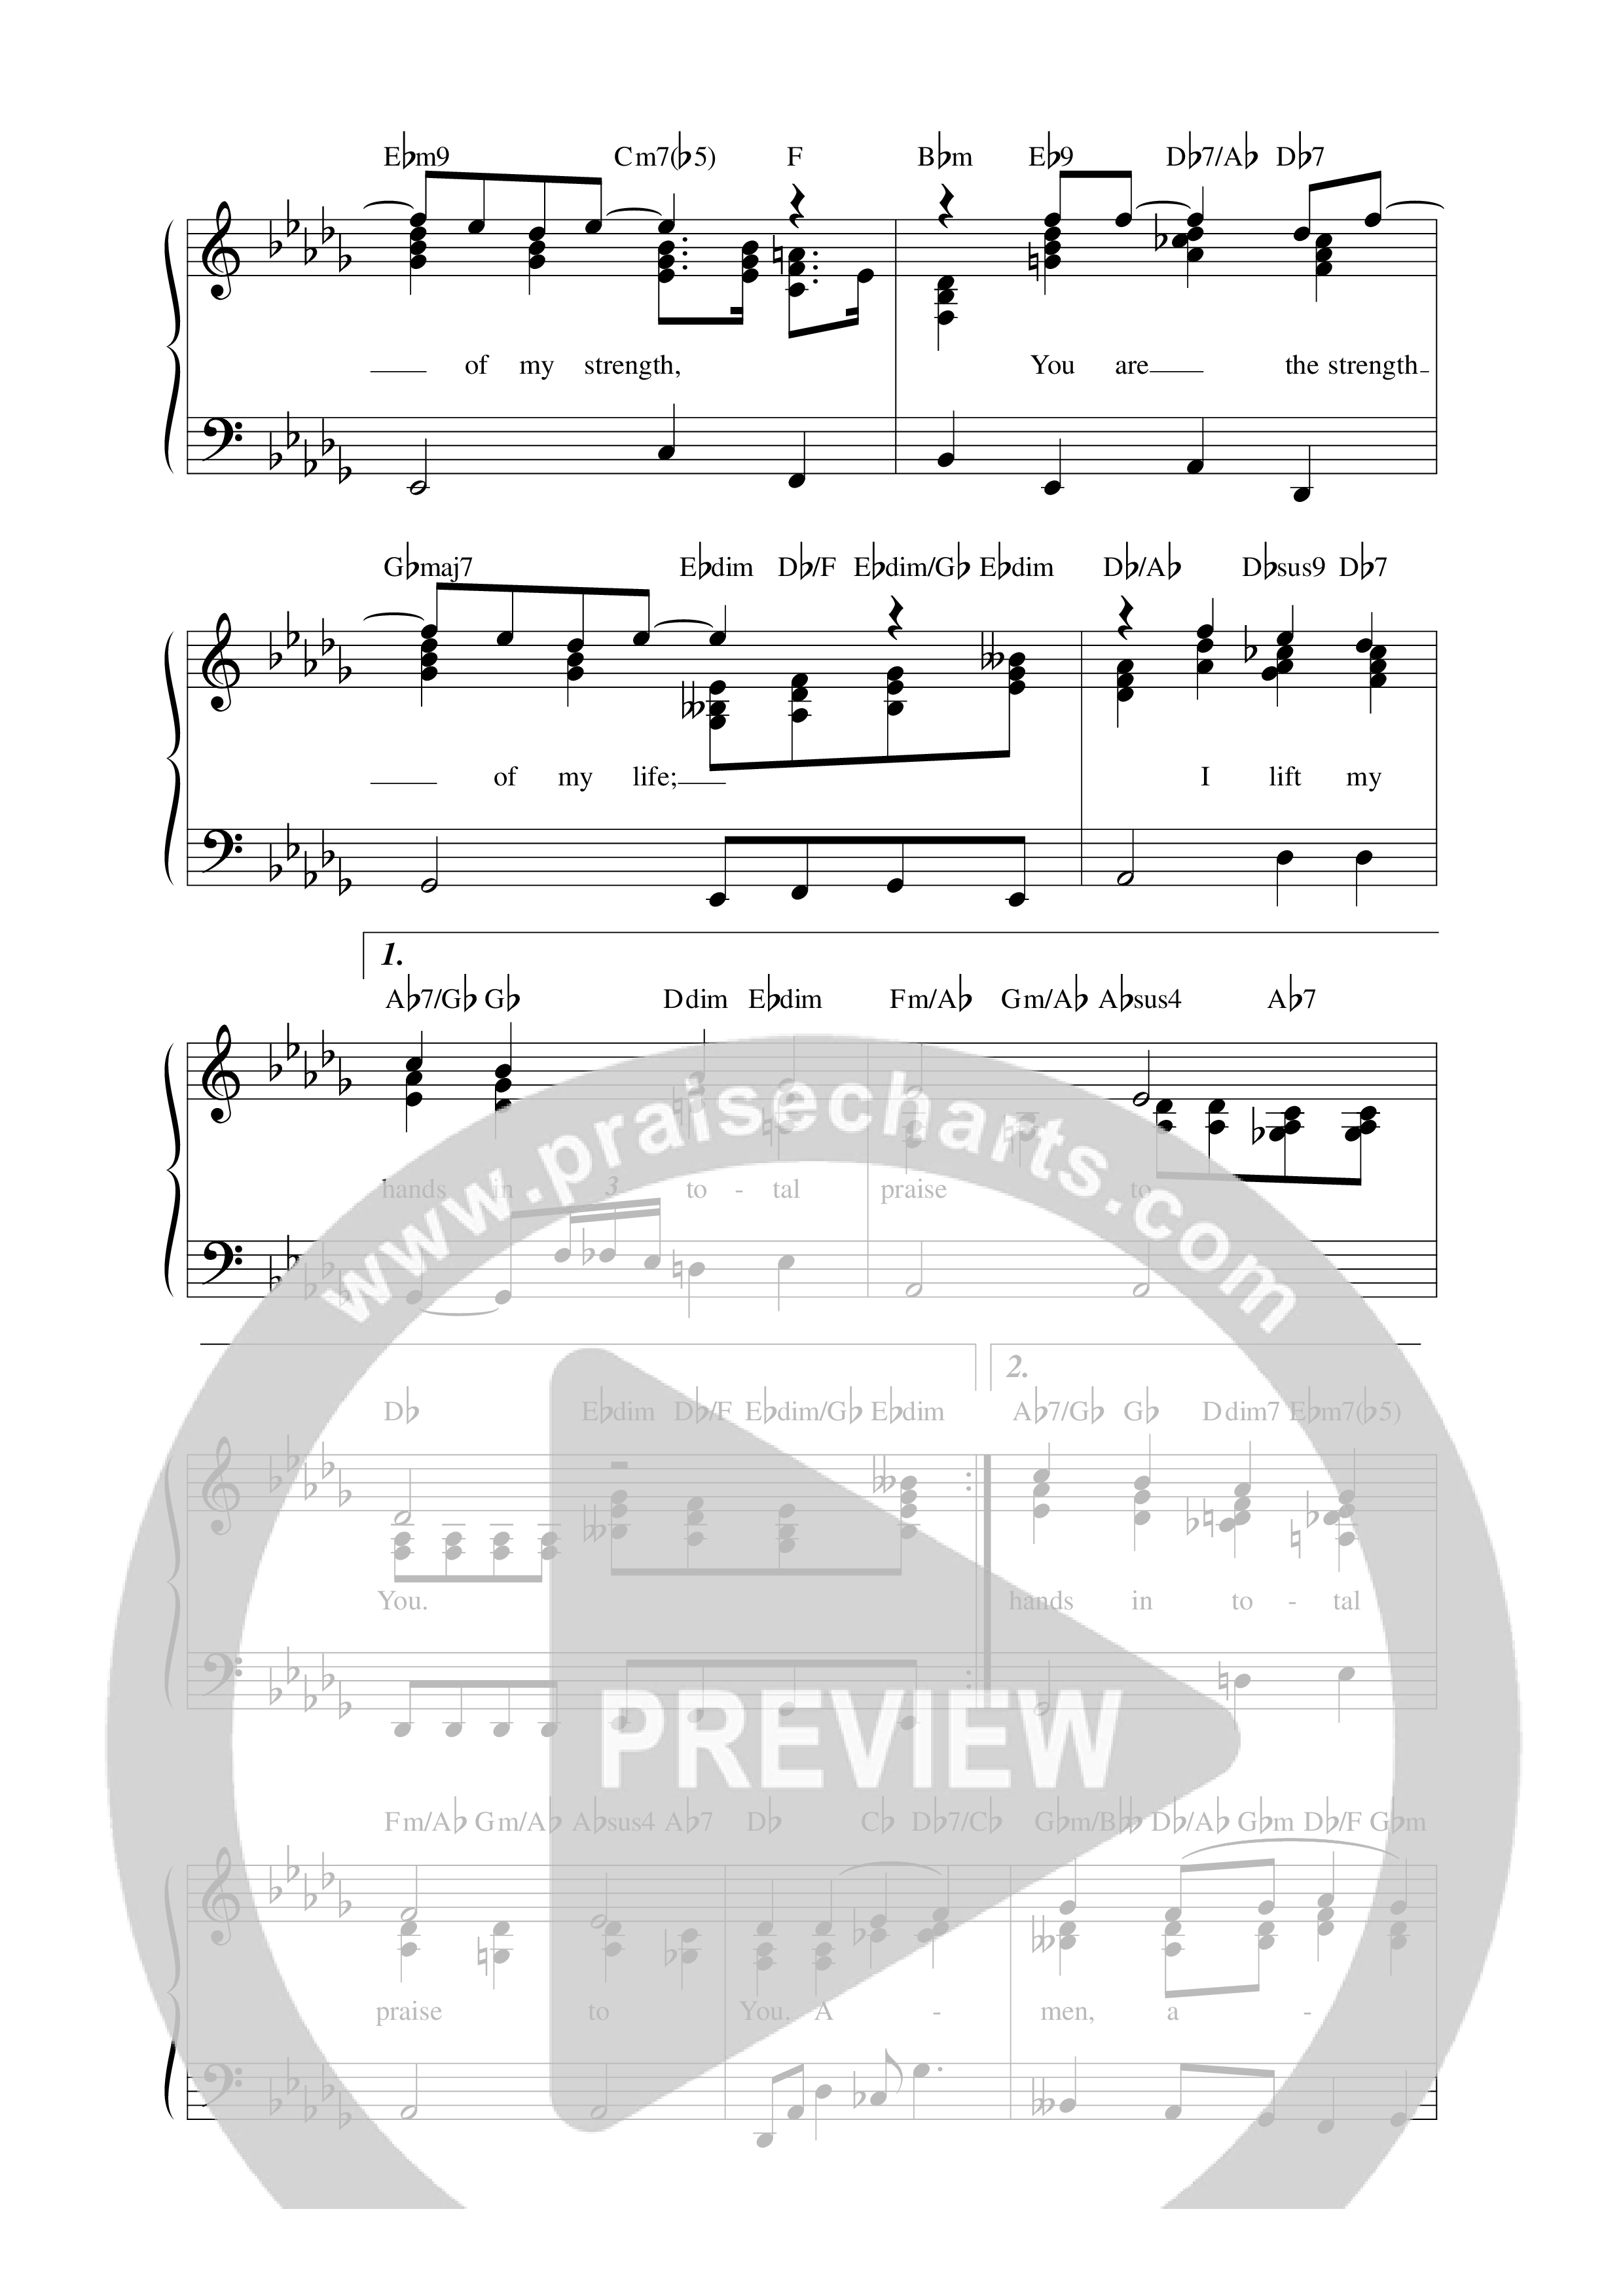 Total Praise (REVERE Unscripted) Lead Sheet Melody (REVERE)